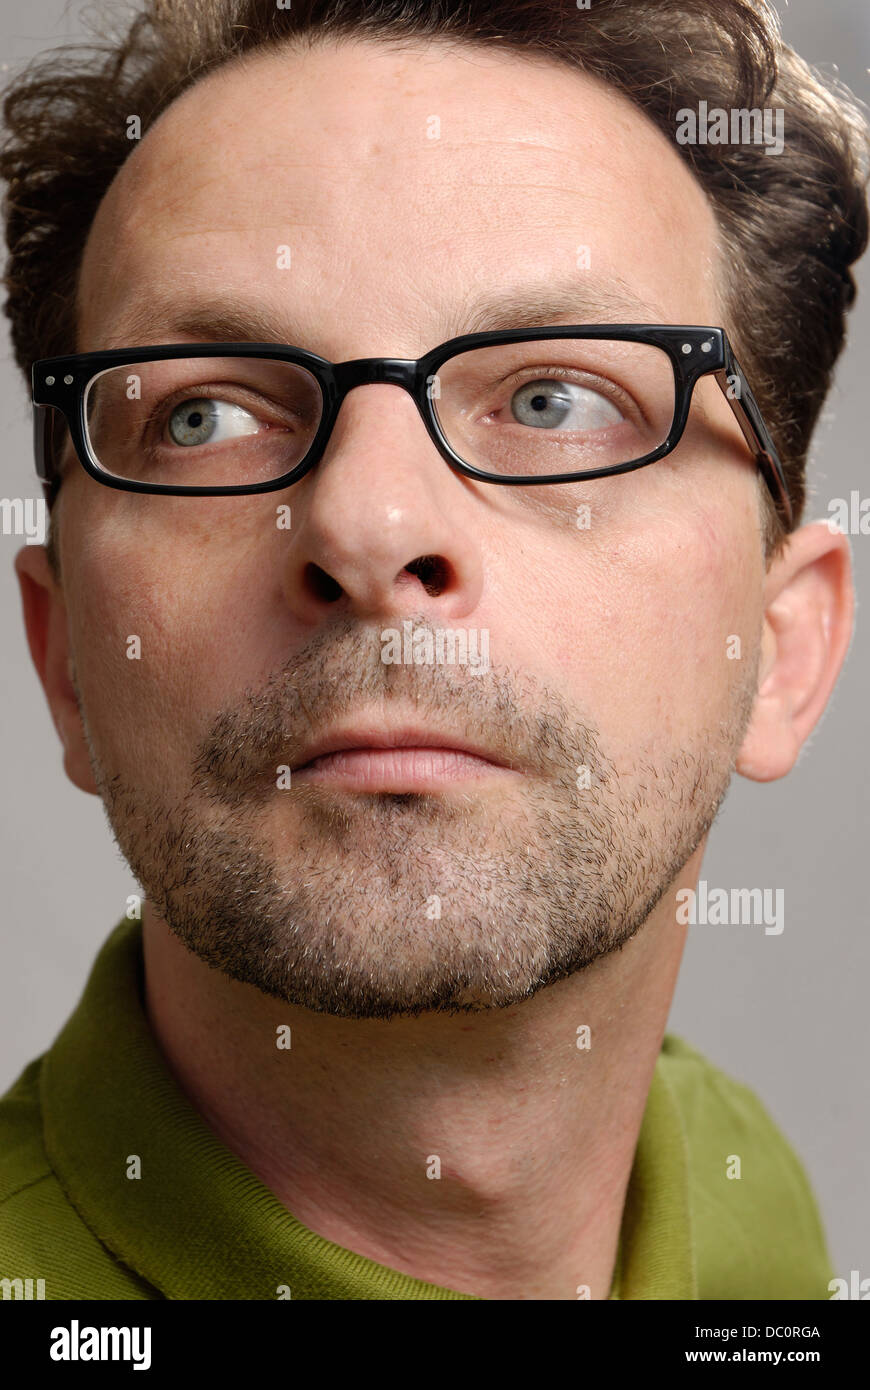 A man with glasses, a green polo shirt and unshaven Stock Photo